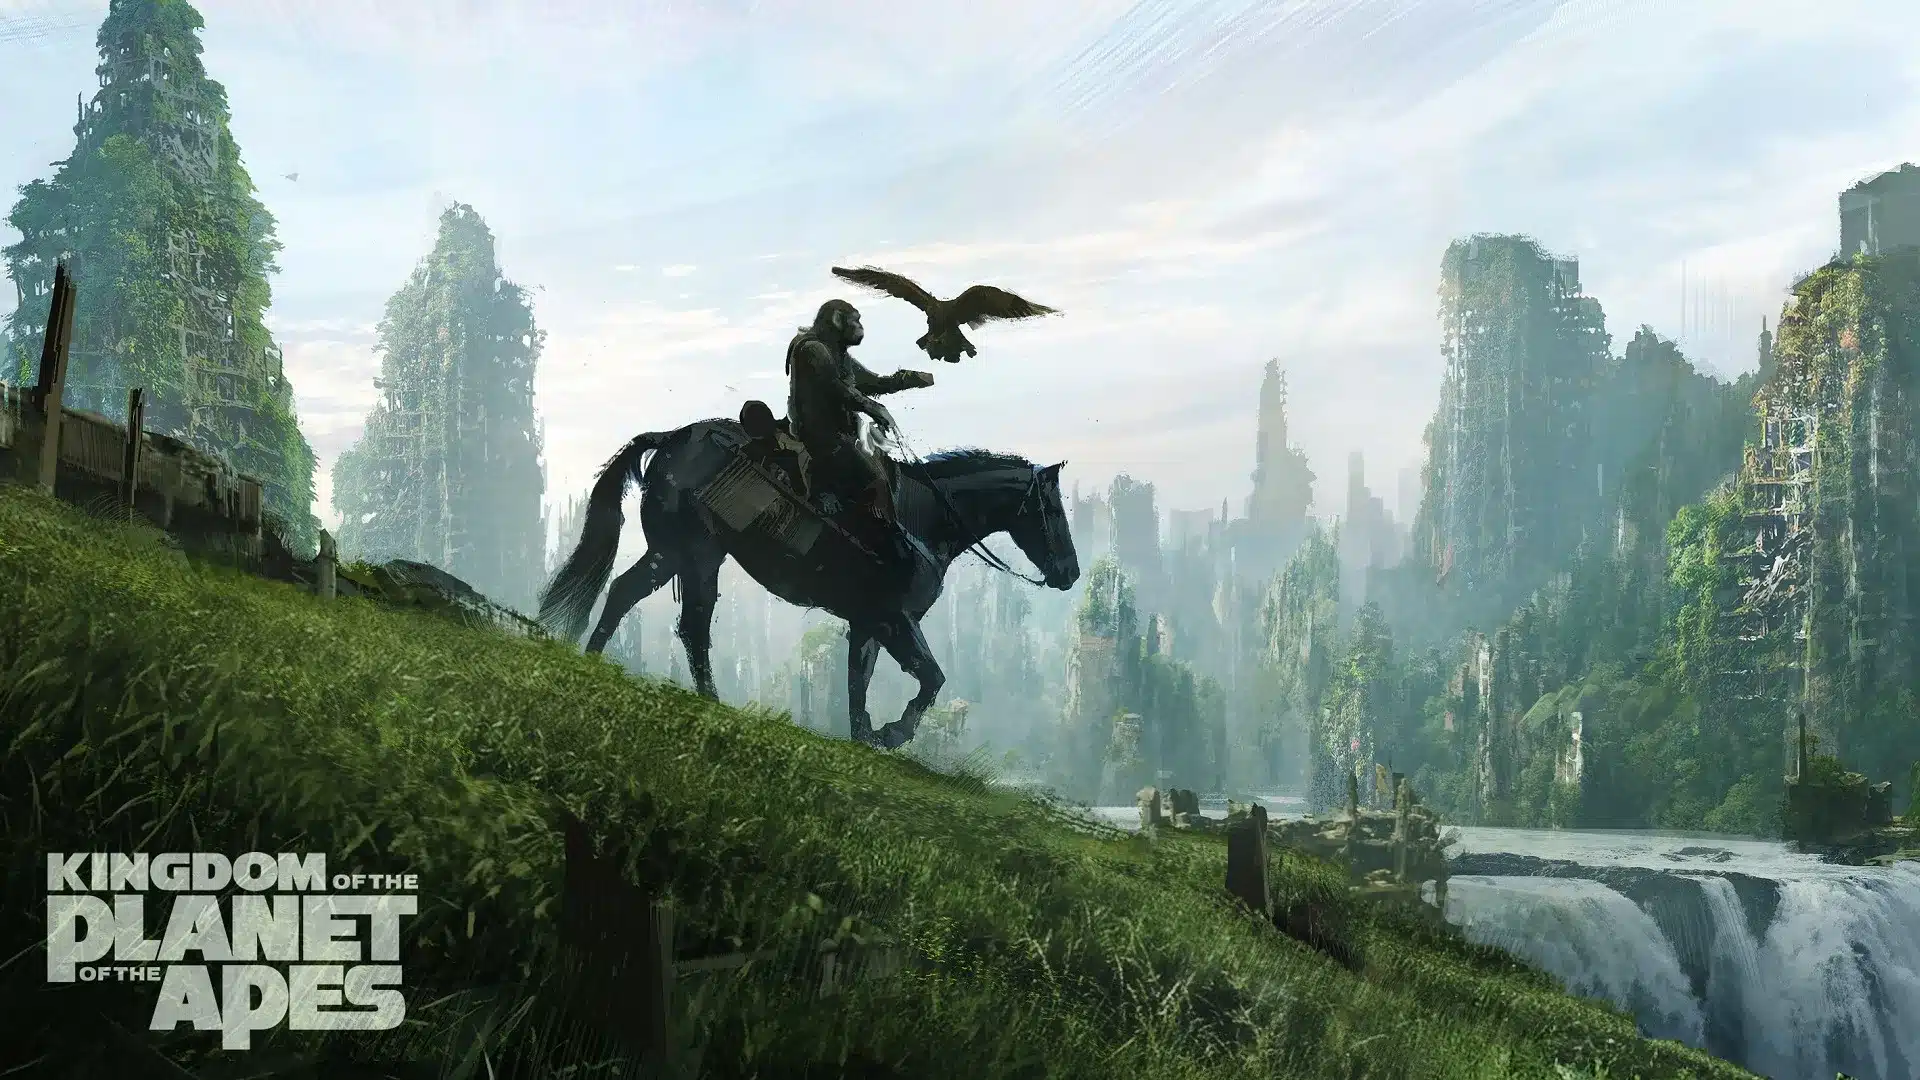 A rider on horseback in a lush, overgrown landscape with tall, green foliage and cascading waterfalls. The rider extends their arm as an eagle flies towards them. The image includes the text